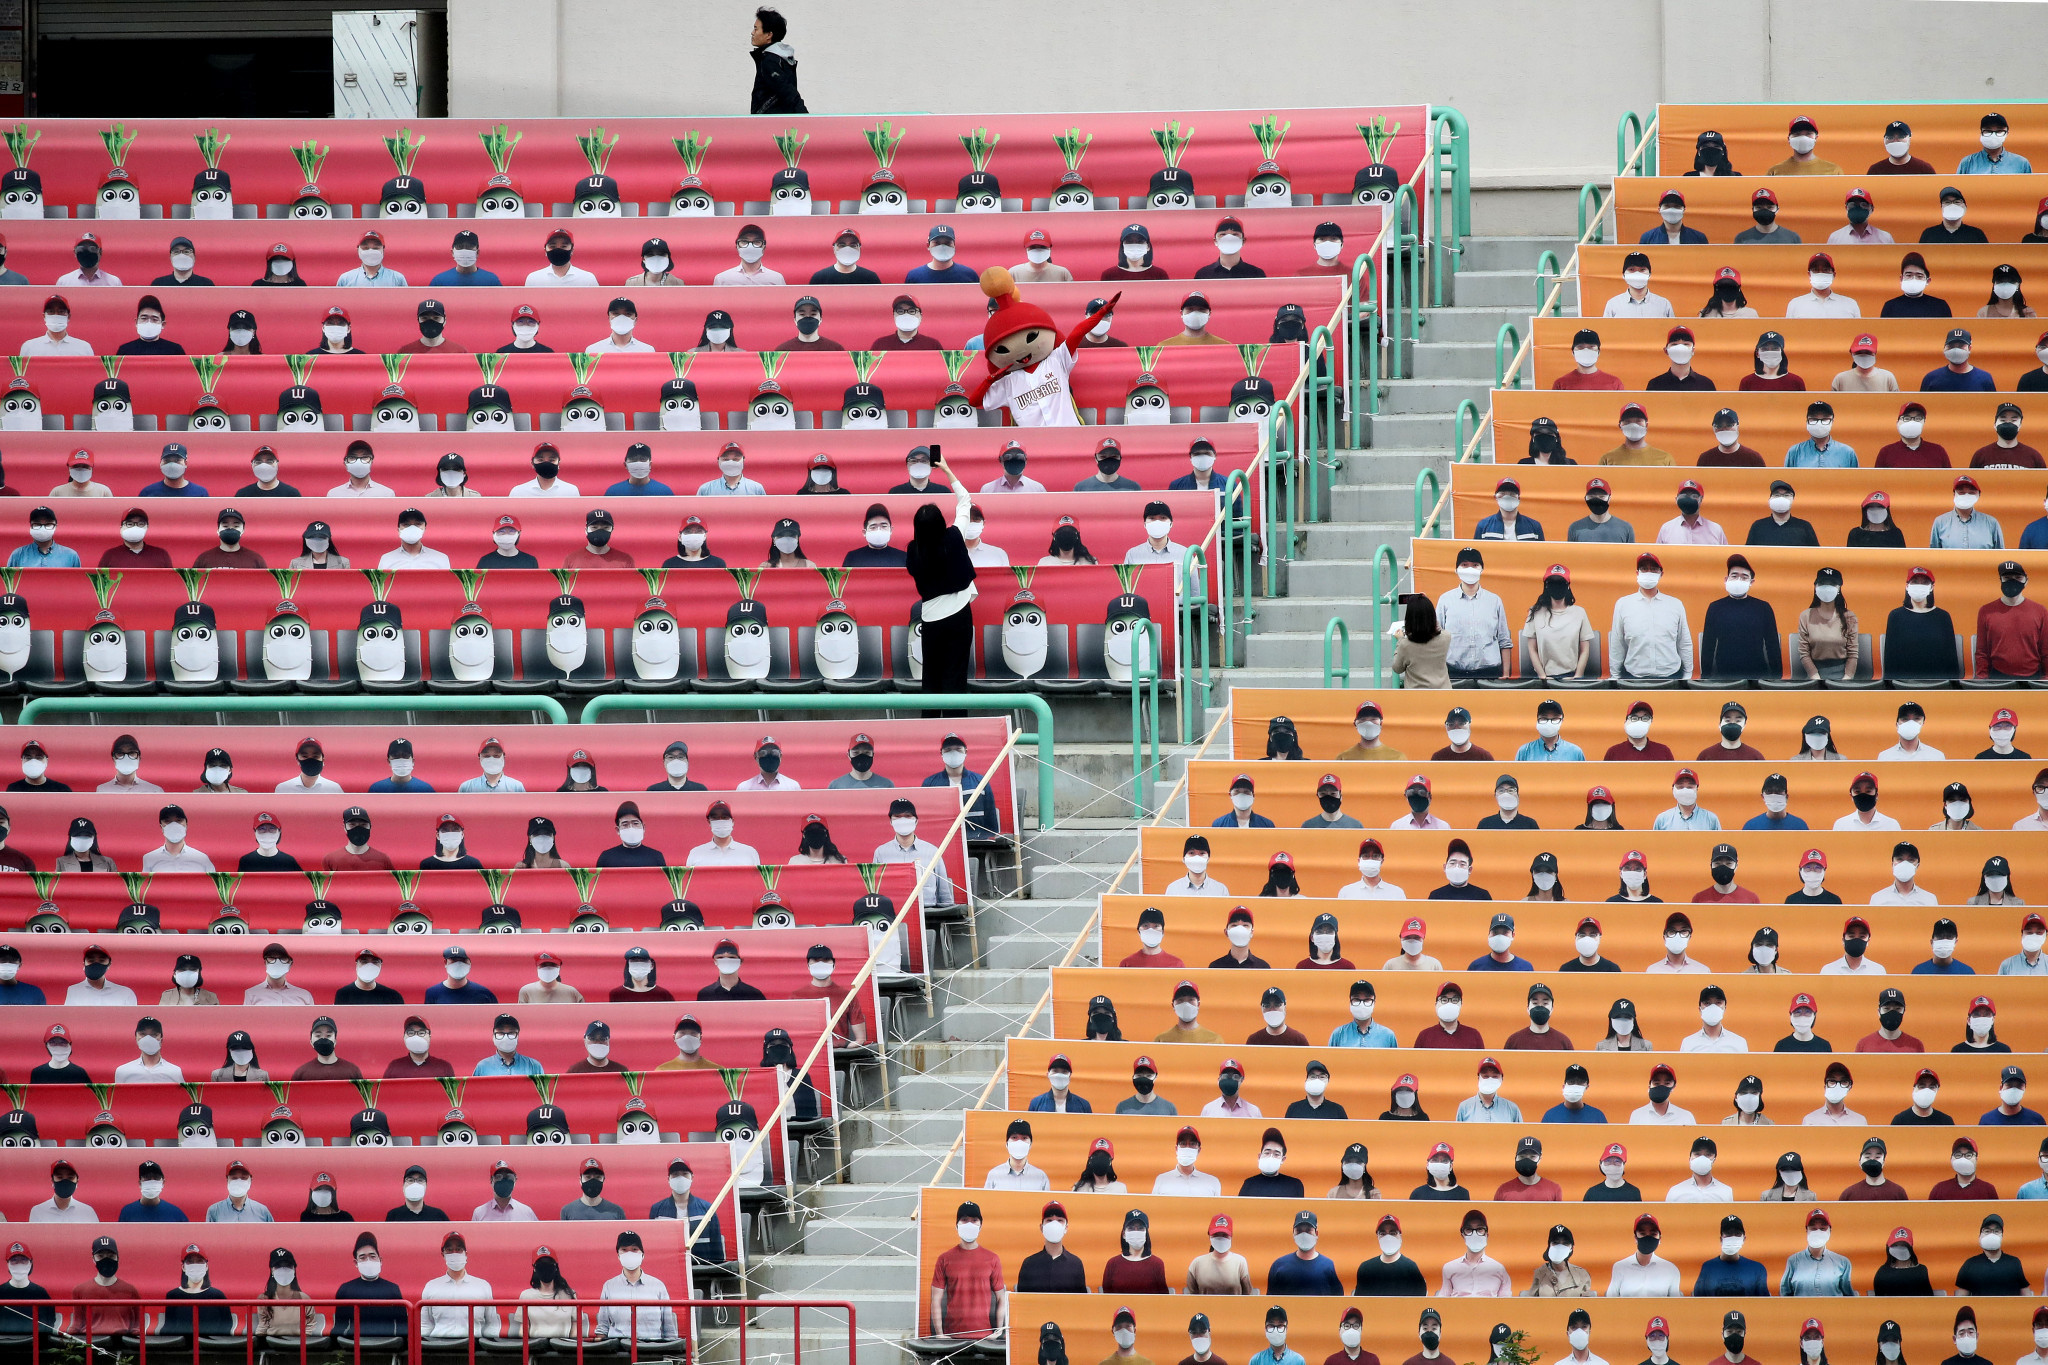 Baseball matches have resumed in South Korea but in empty stadiums ©Getty Images